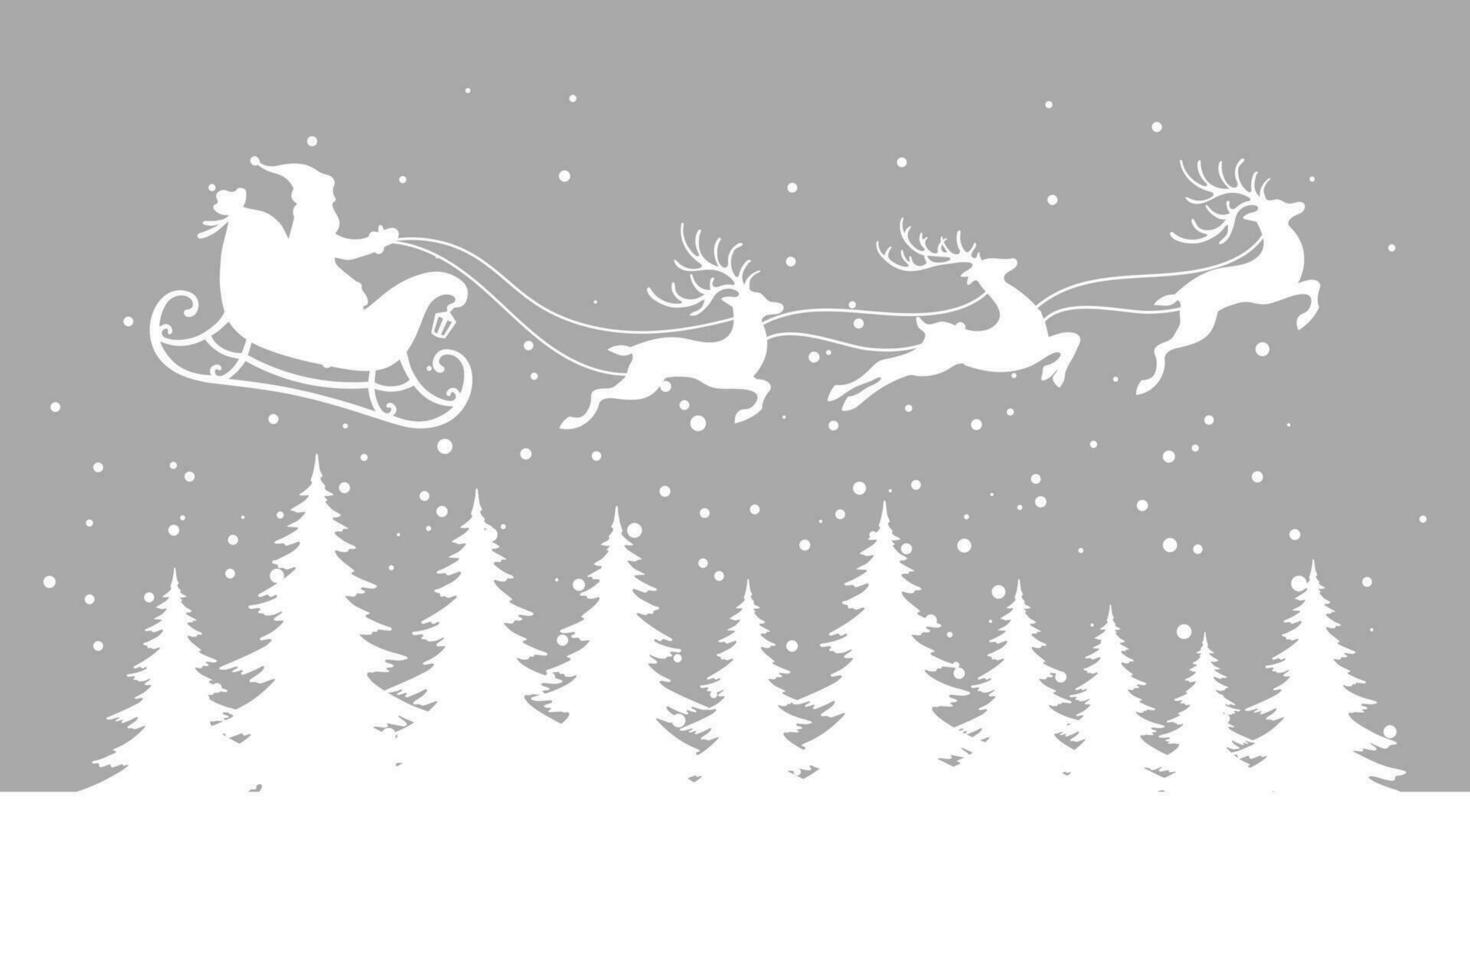 Santa on a sleigh with reindeers in the sky with the moon, winter landscape, white silhouette on a pastel background. Christmas illustration, vector